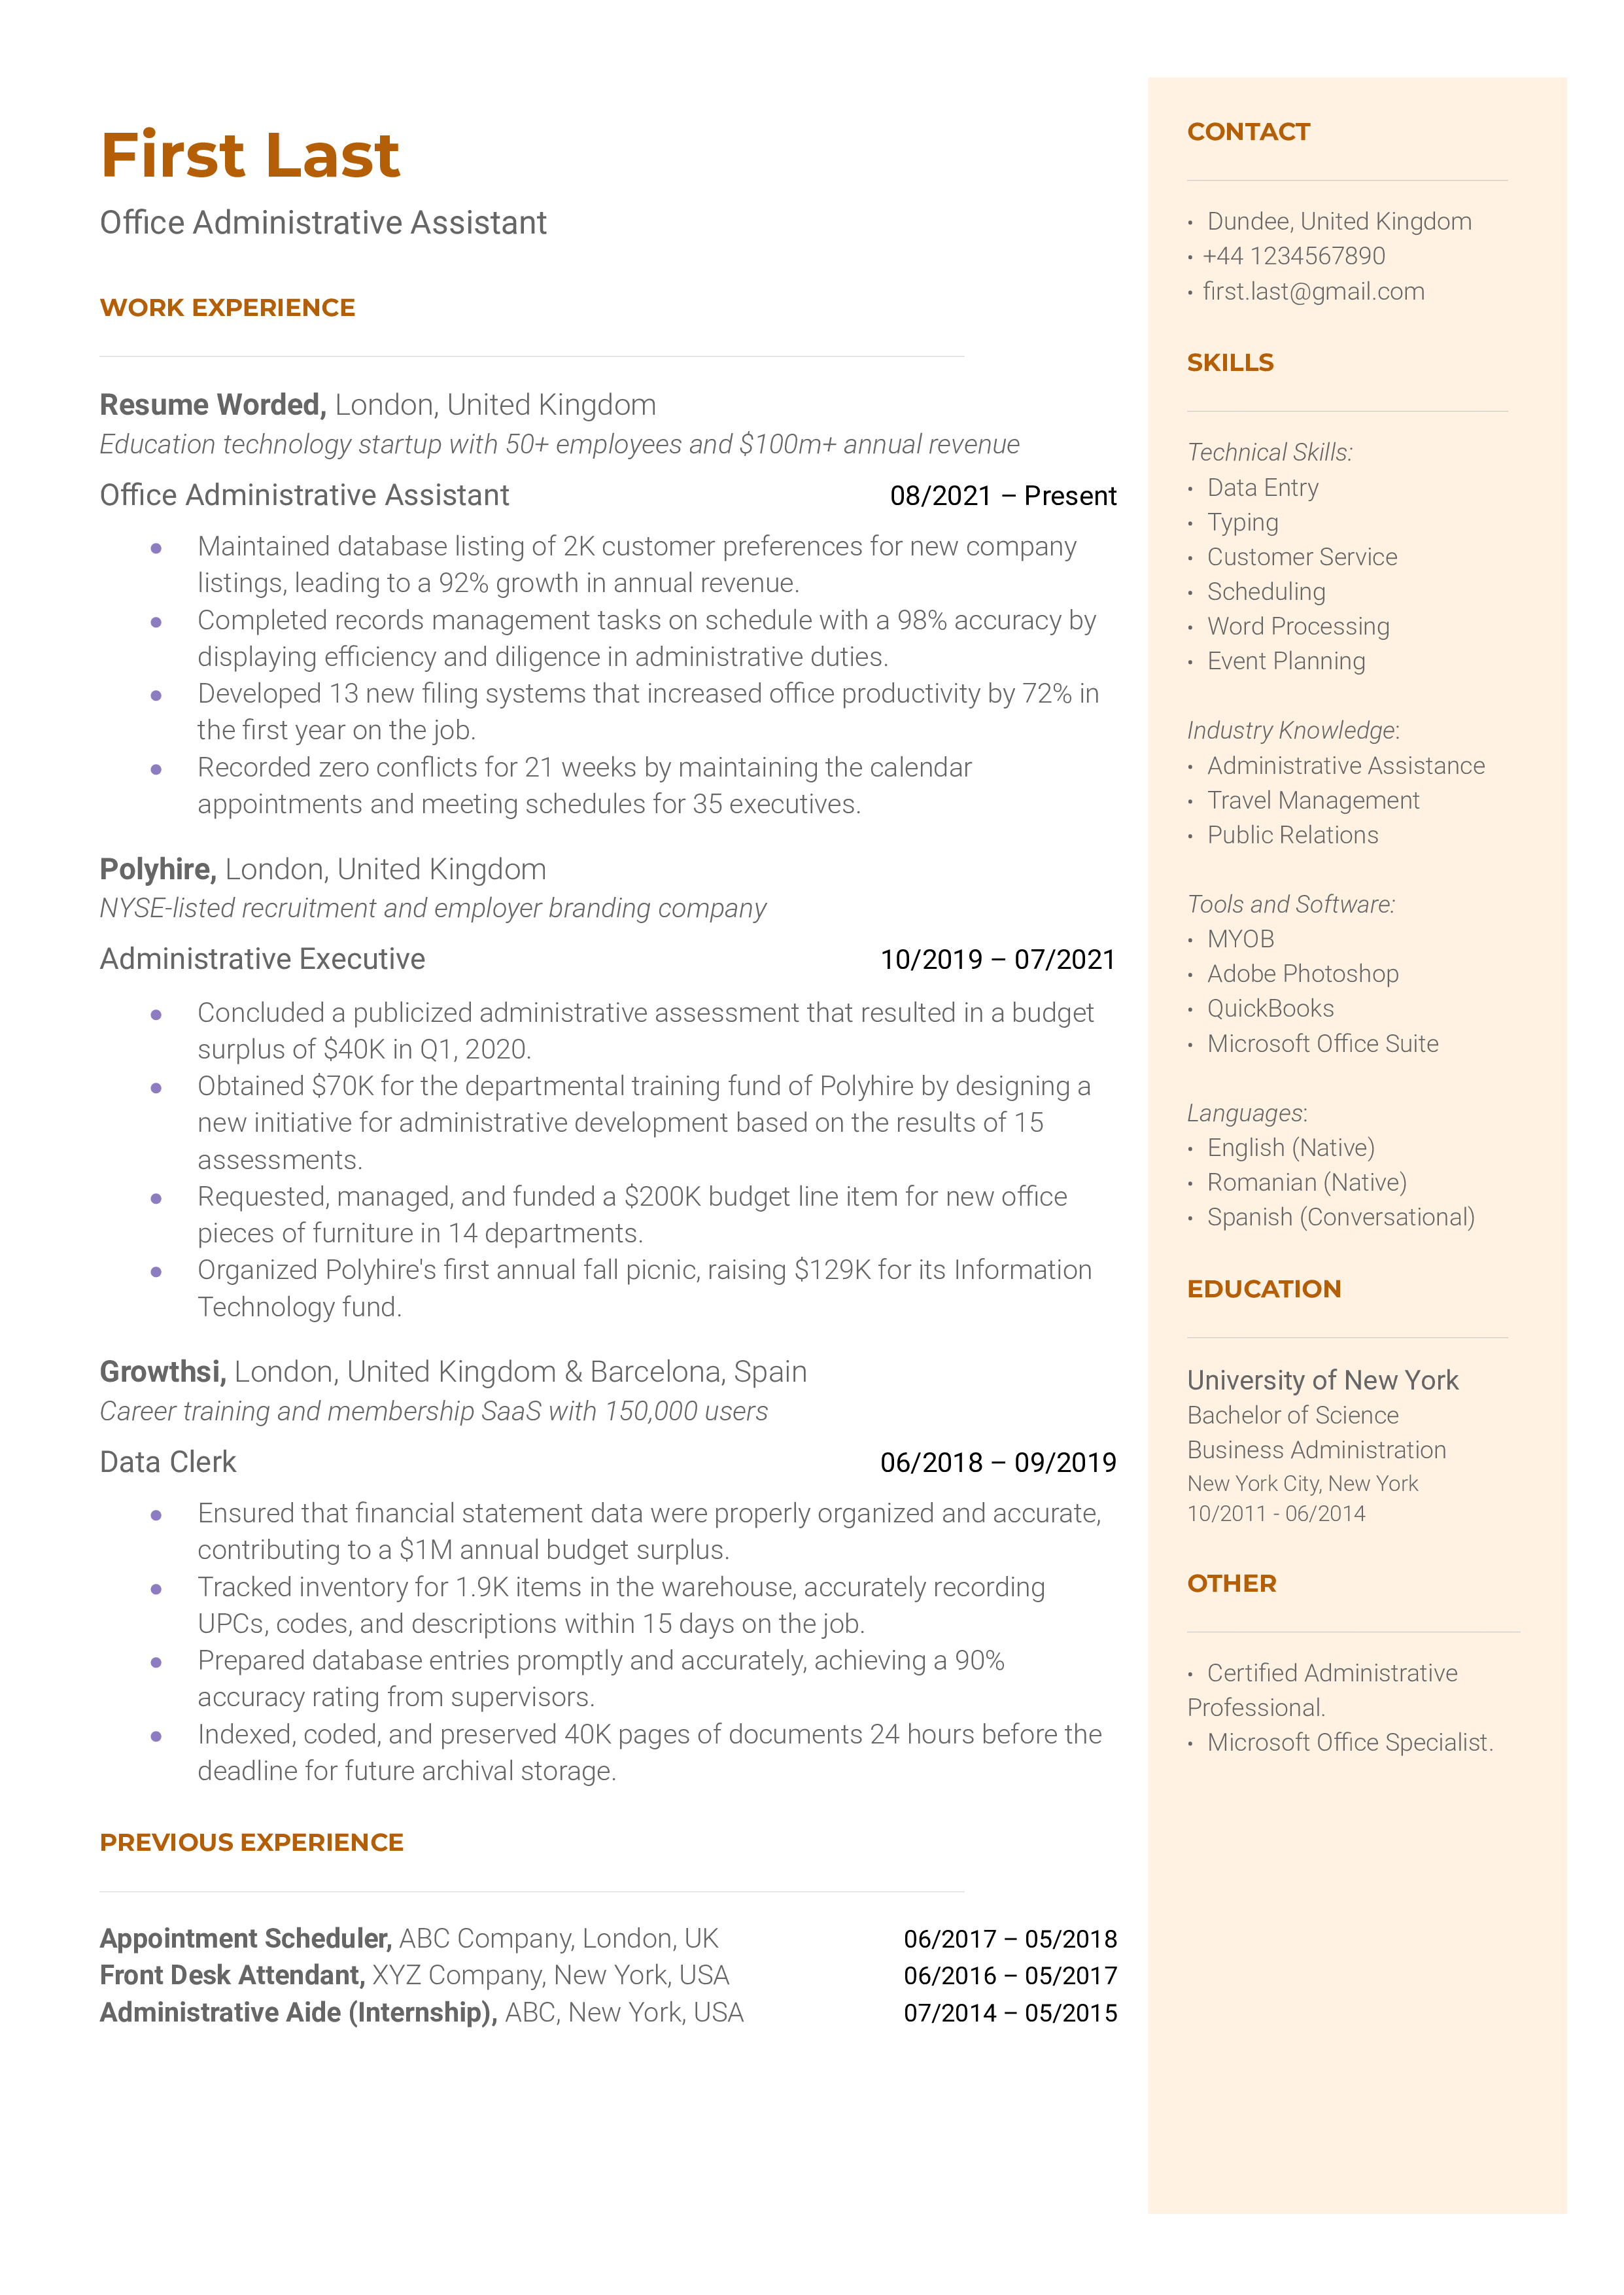 A screenshot of a CV prepared for an Office Administrative Assistant role.